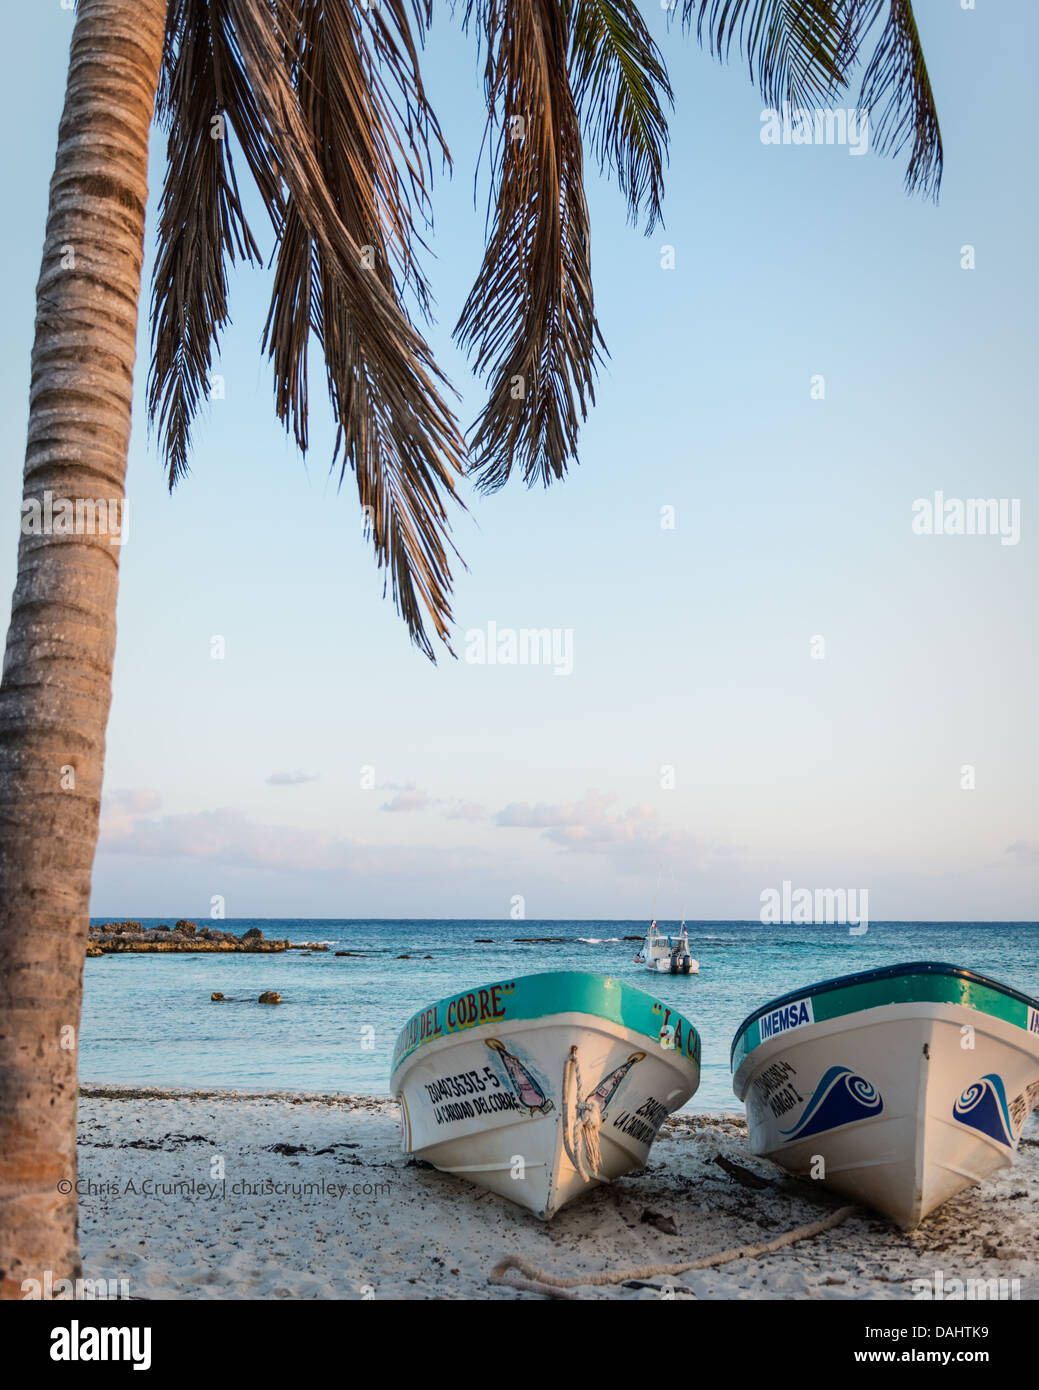 Two boats on a beach at sunset in Cozumel, Mexico Stock Photo